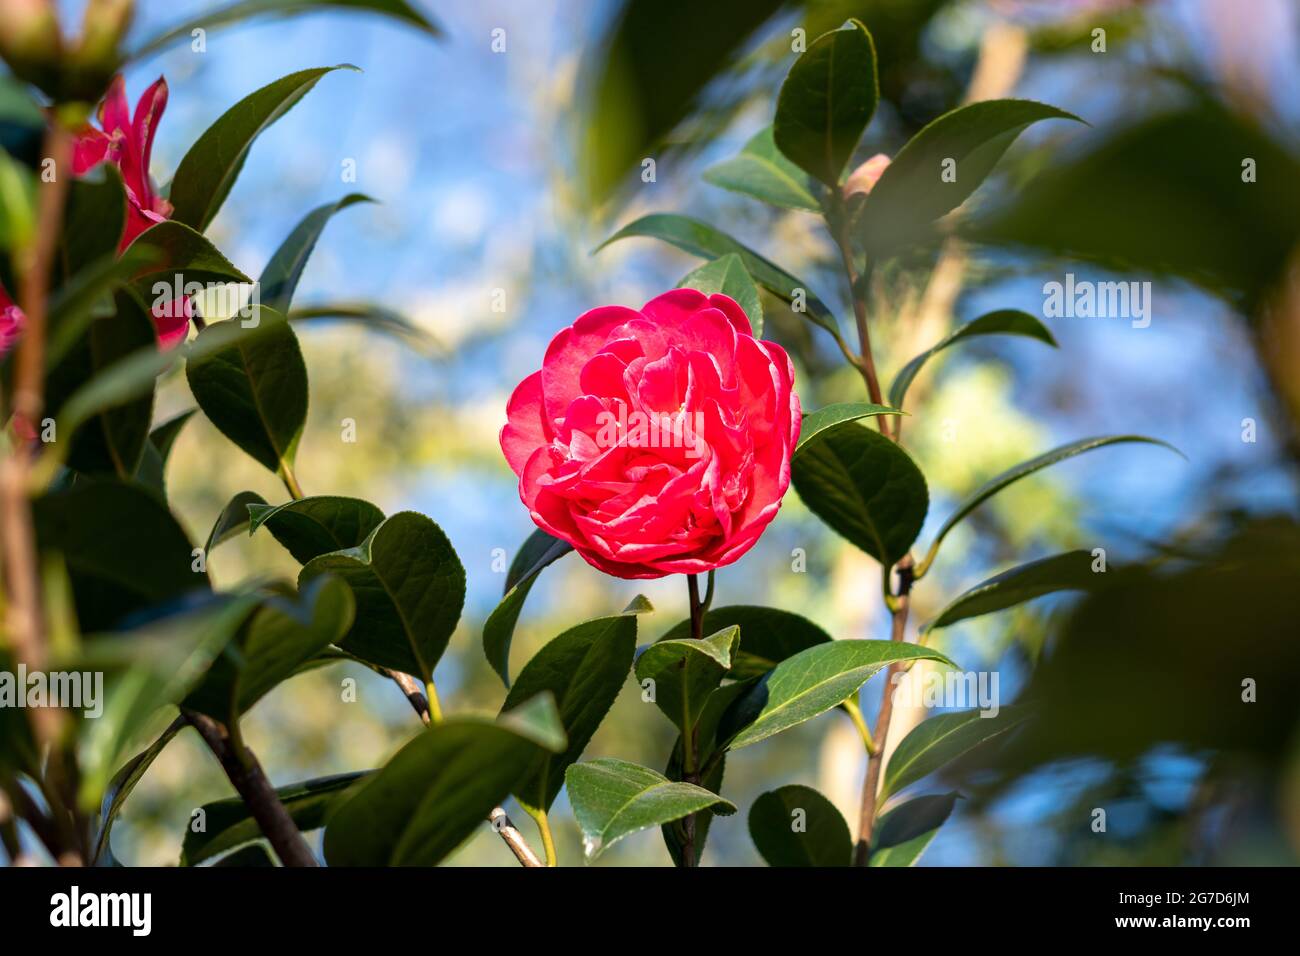 Close-up of camellia japonica red rose flower in the garden, sunny spring day. Stock Photo